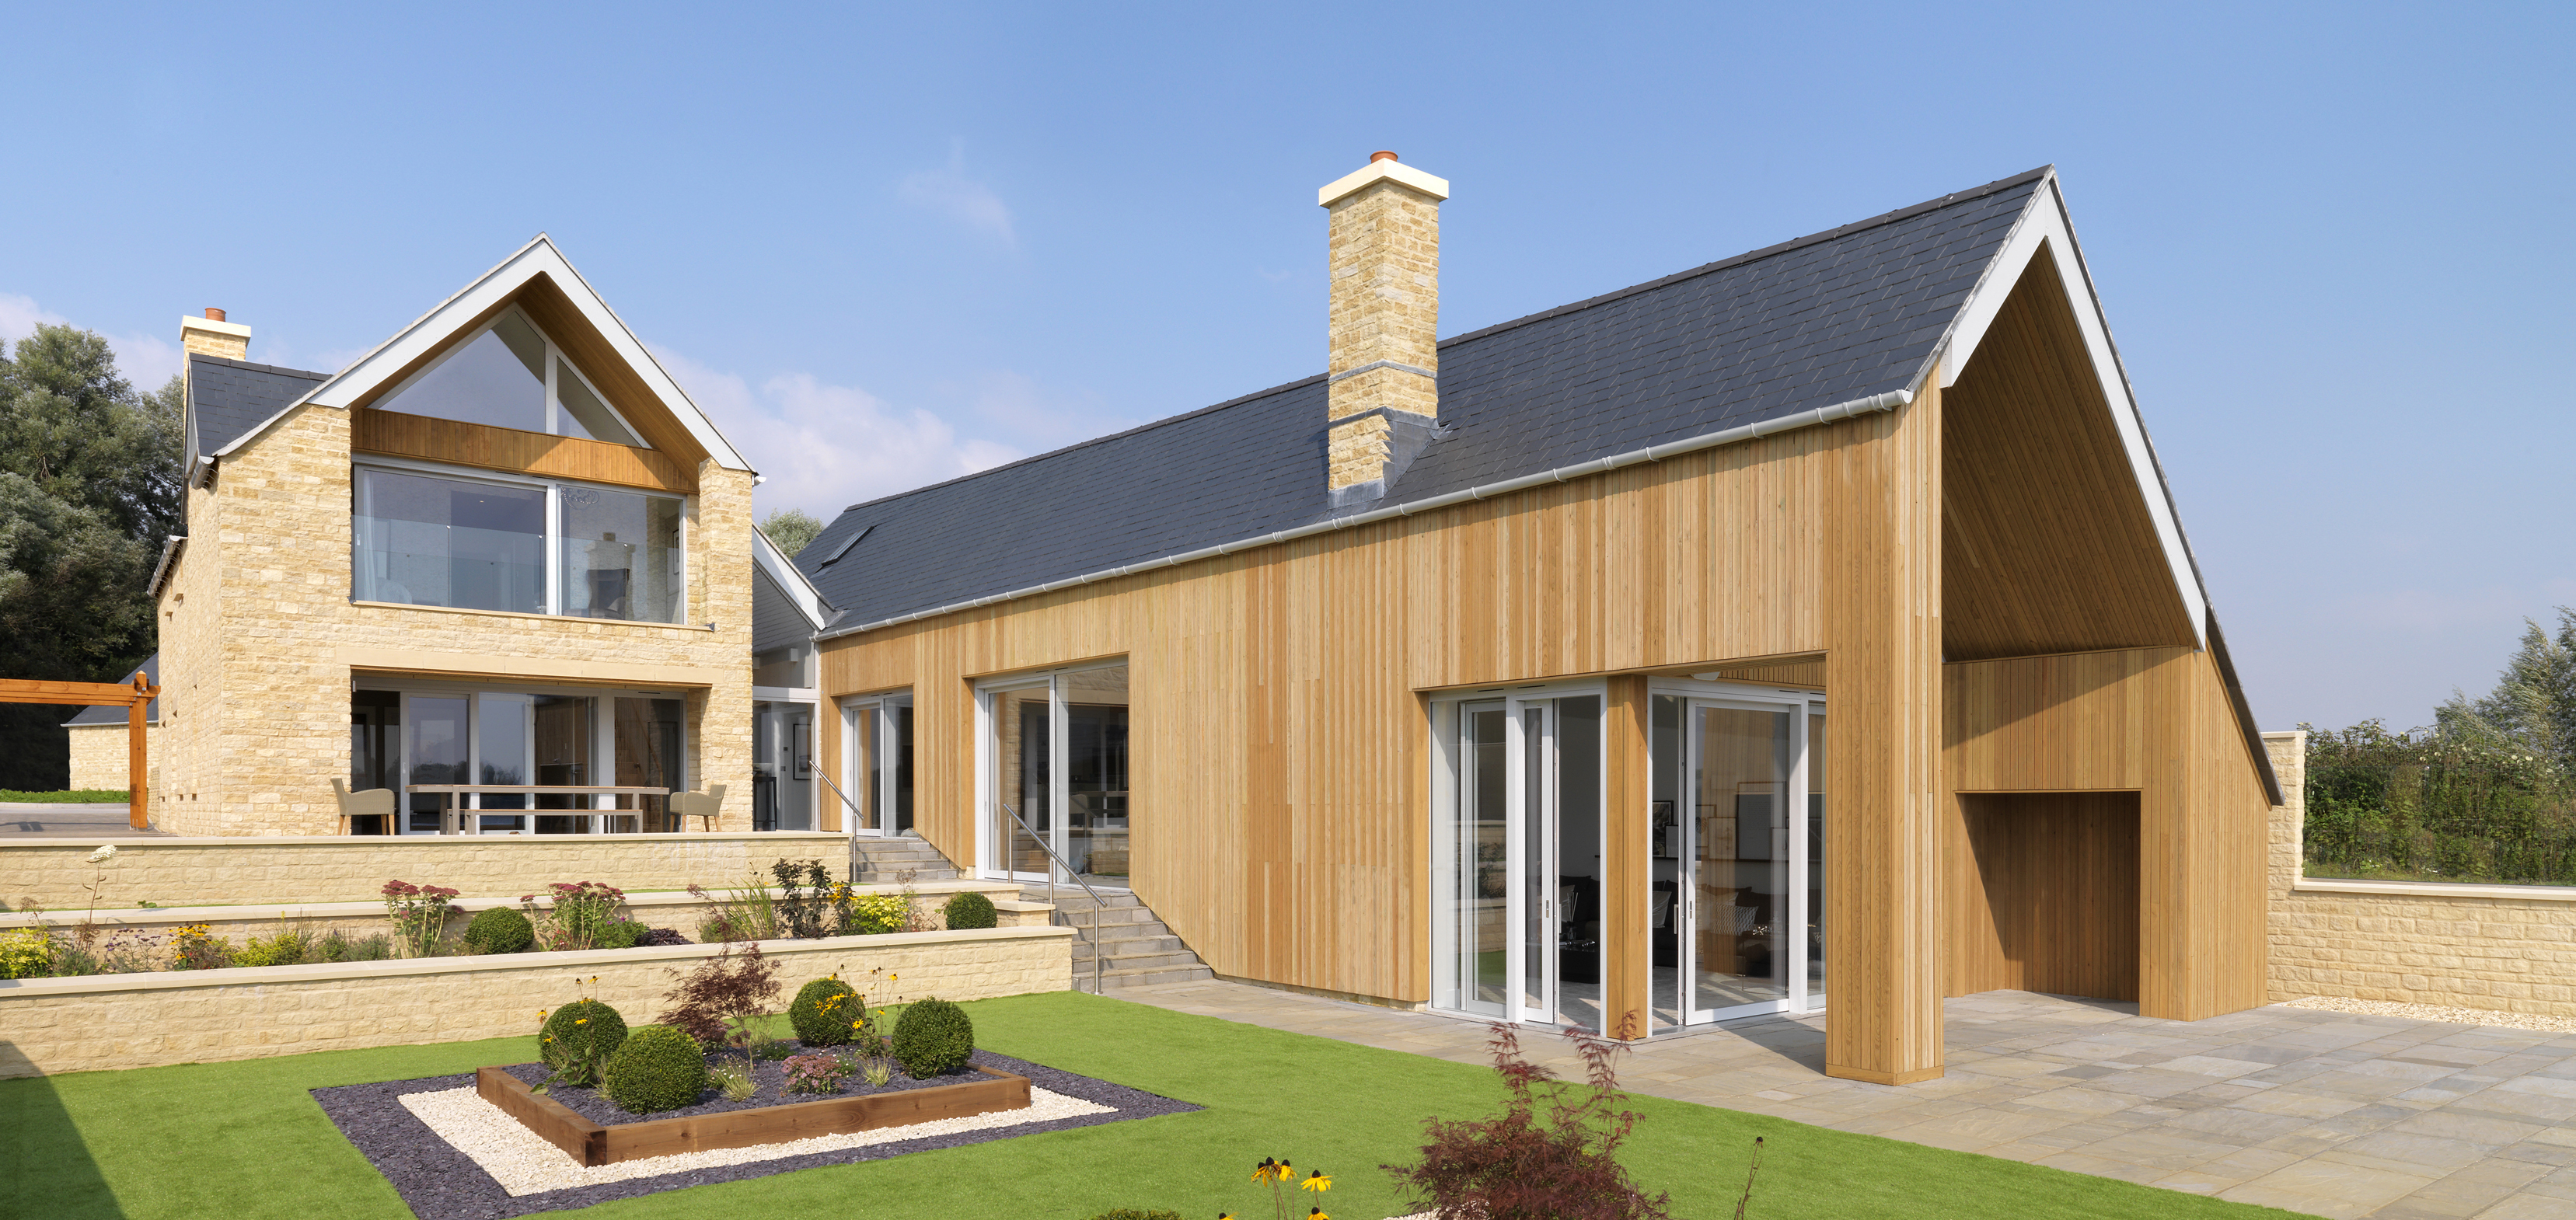 </p> <p>Find your ideal home design pro on designfor-me.com - get matched and see who's interested in your home project. Click image to see more inspiration from our design pros</p> <p>Design by Julian, architect from Bath and North East Somerset, South West</p> <p>#architecture #homedesign #modernhomes #homeinspiration #timbercladding #selfbuilds #selfbuildinspiration #selfbuildideas #granddesigns </p> <p>